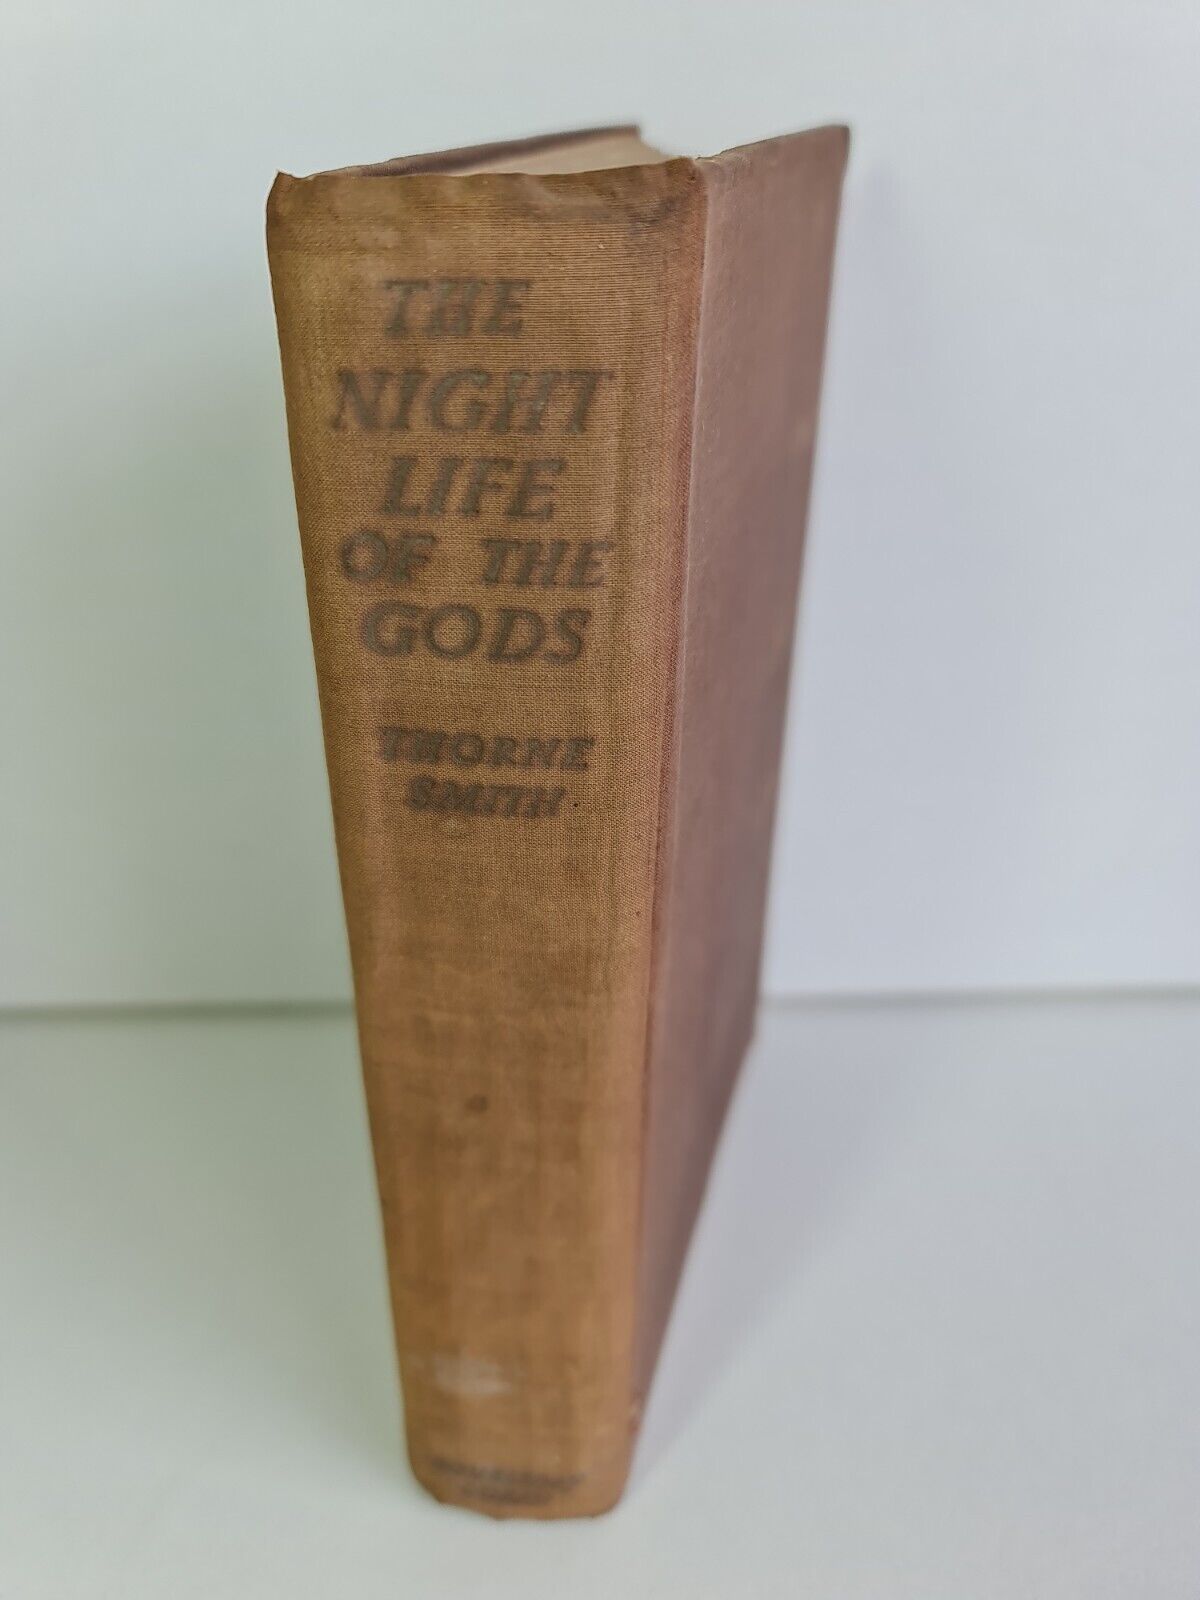 The Night Life of the Gods by Thorne Smith (1931)